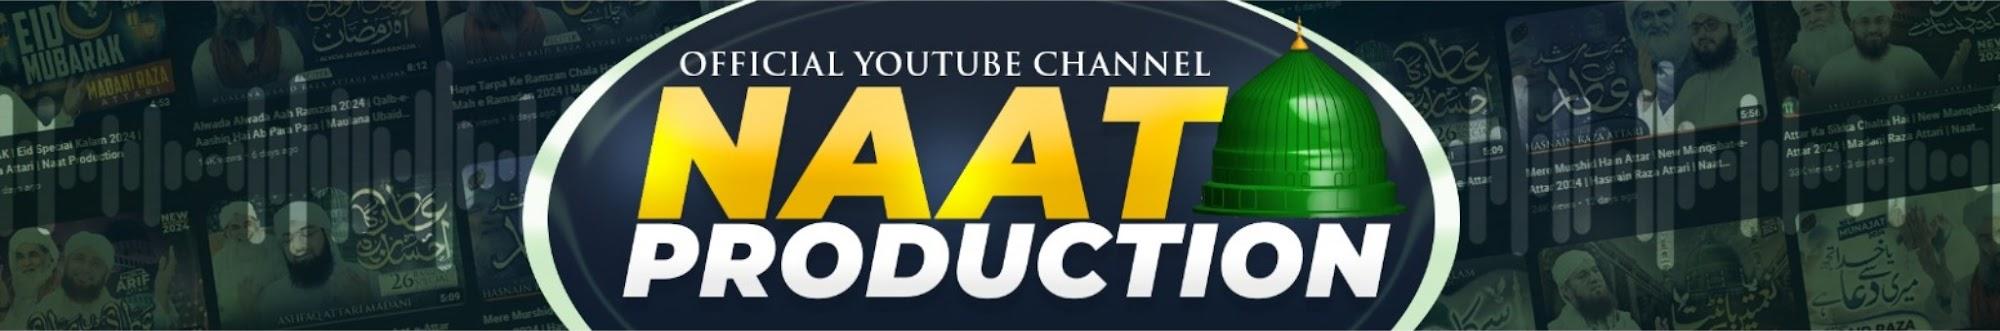 Naat Production